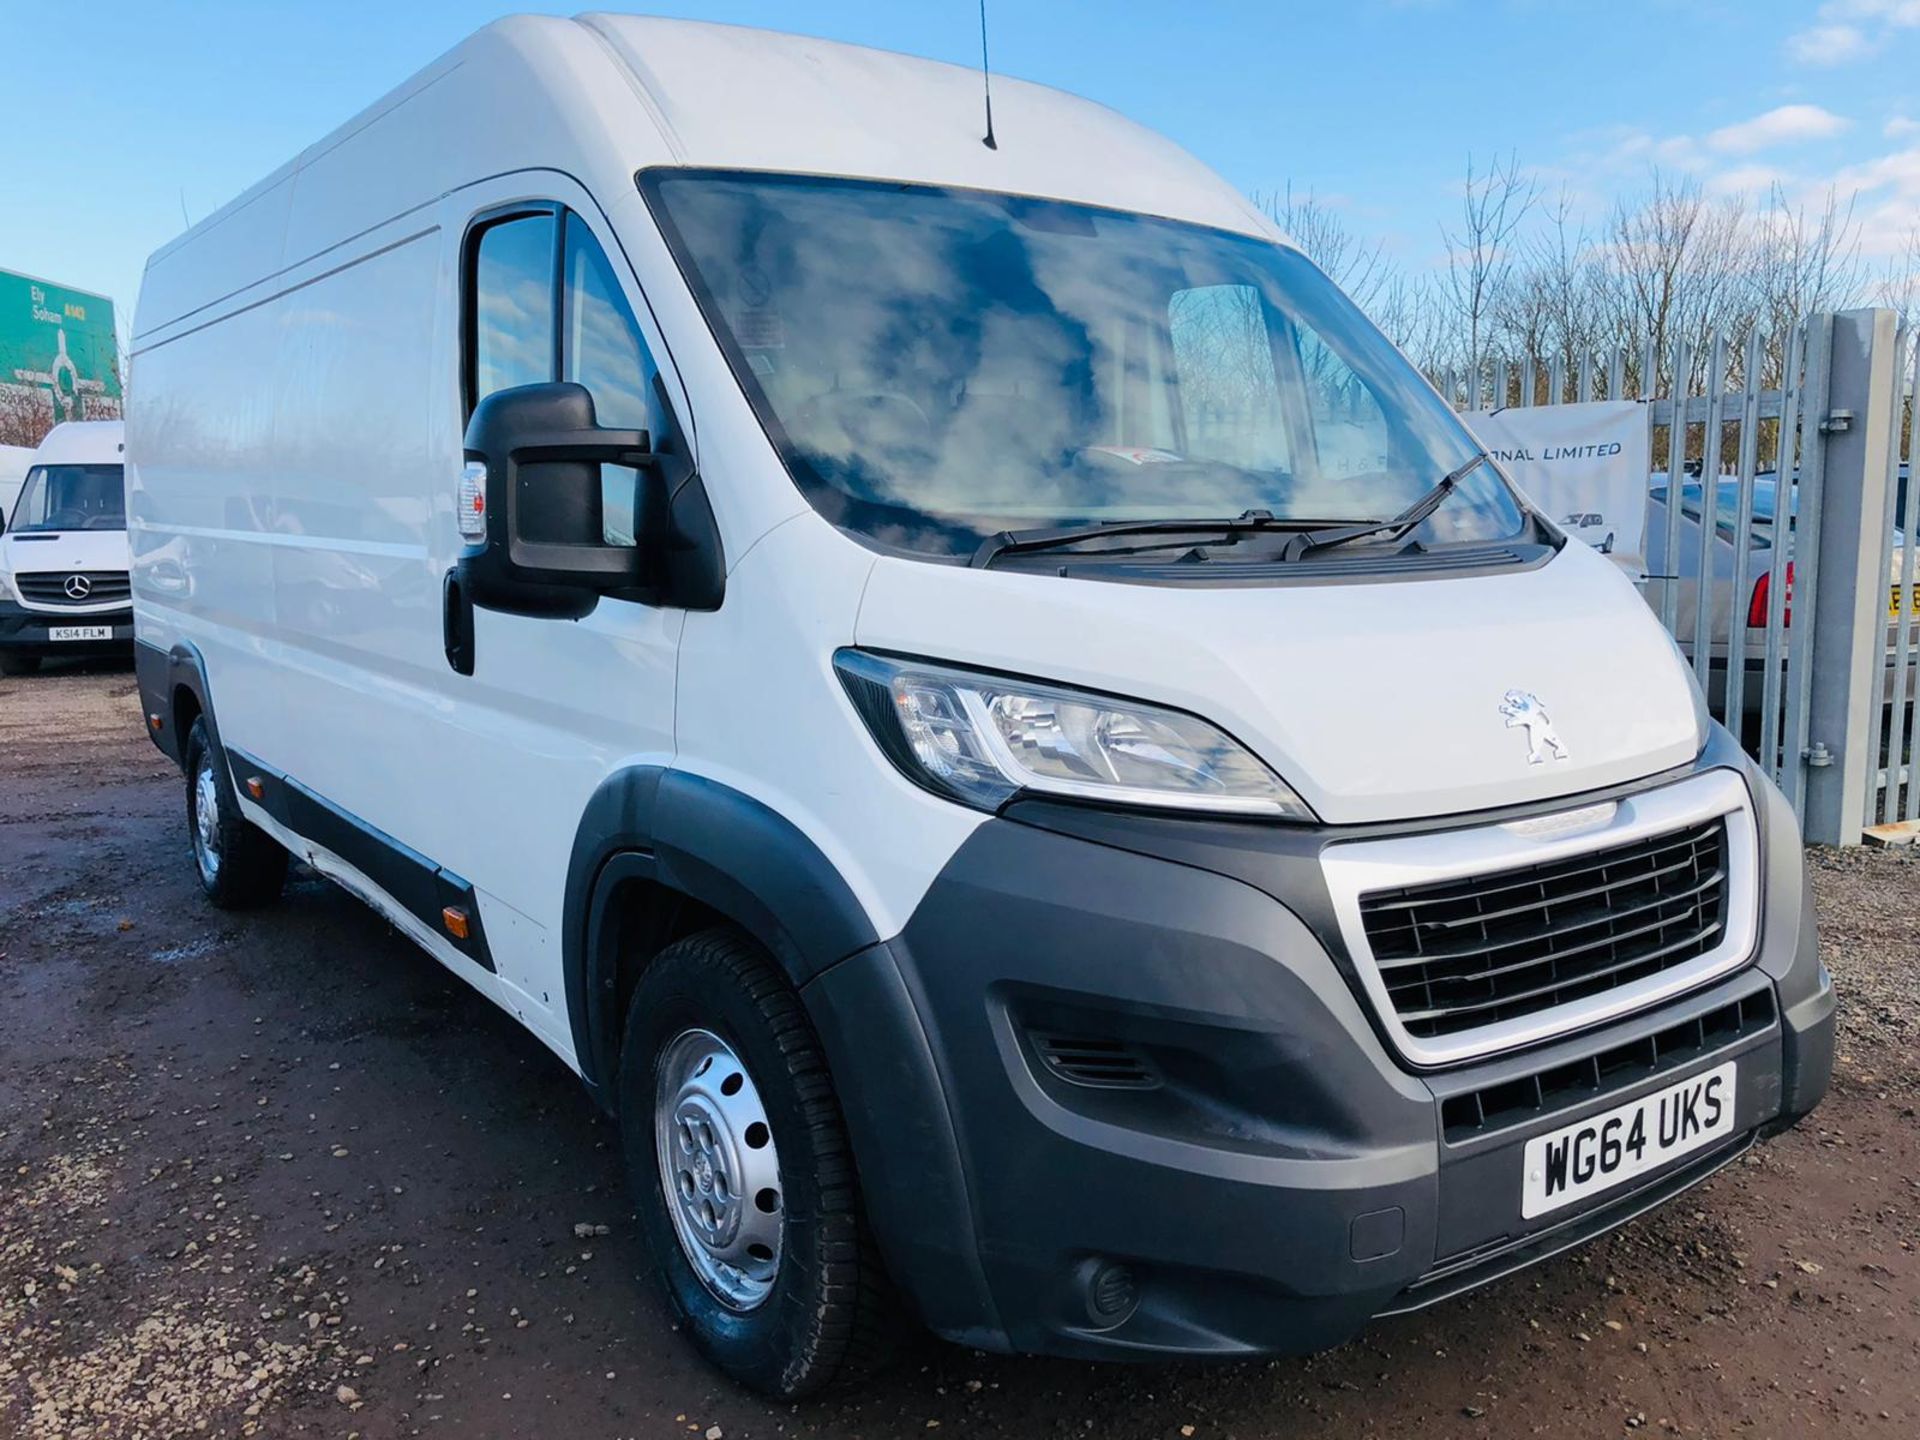 Peugeot Boxer 2.2 HDI 435 Professional L4 H2 2014 '64 Reg' Sat Nav - Air Con - Only Done 76K - Image 2 of 24